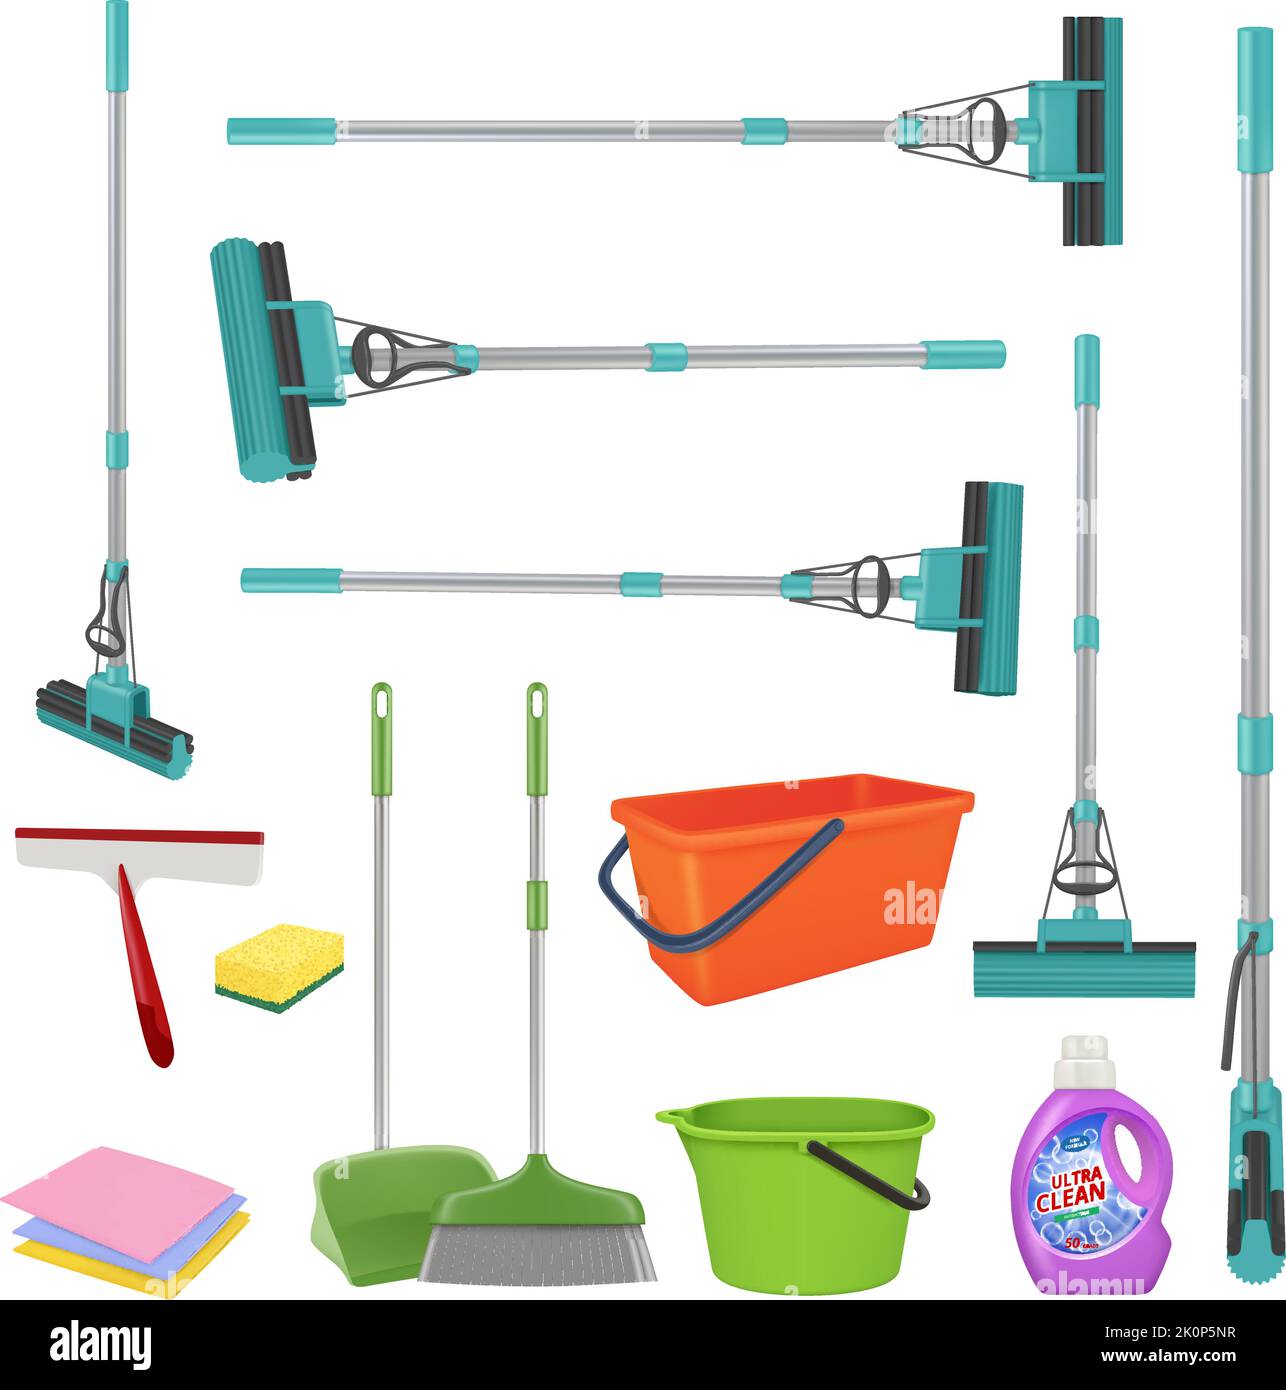 https://c8.alamy.com/comp/2K0P5NR/home-cleaning-tools-mops-rags-buckets-cleaning-detergent-decent-vector-washing-chemical-products-2K0P5NR.jpg